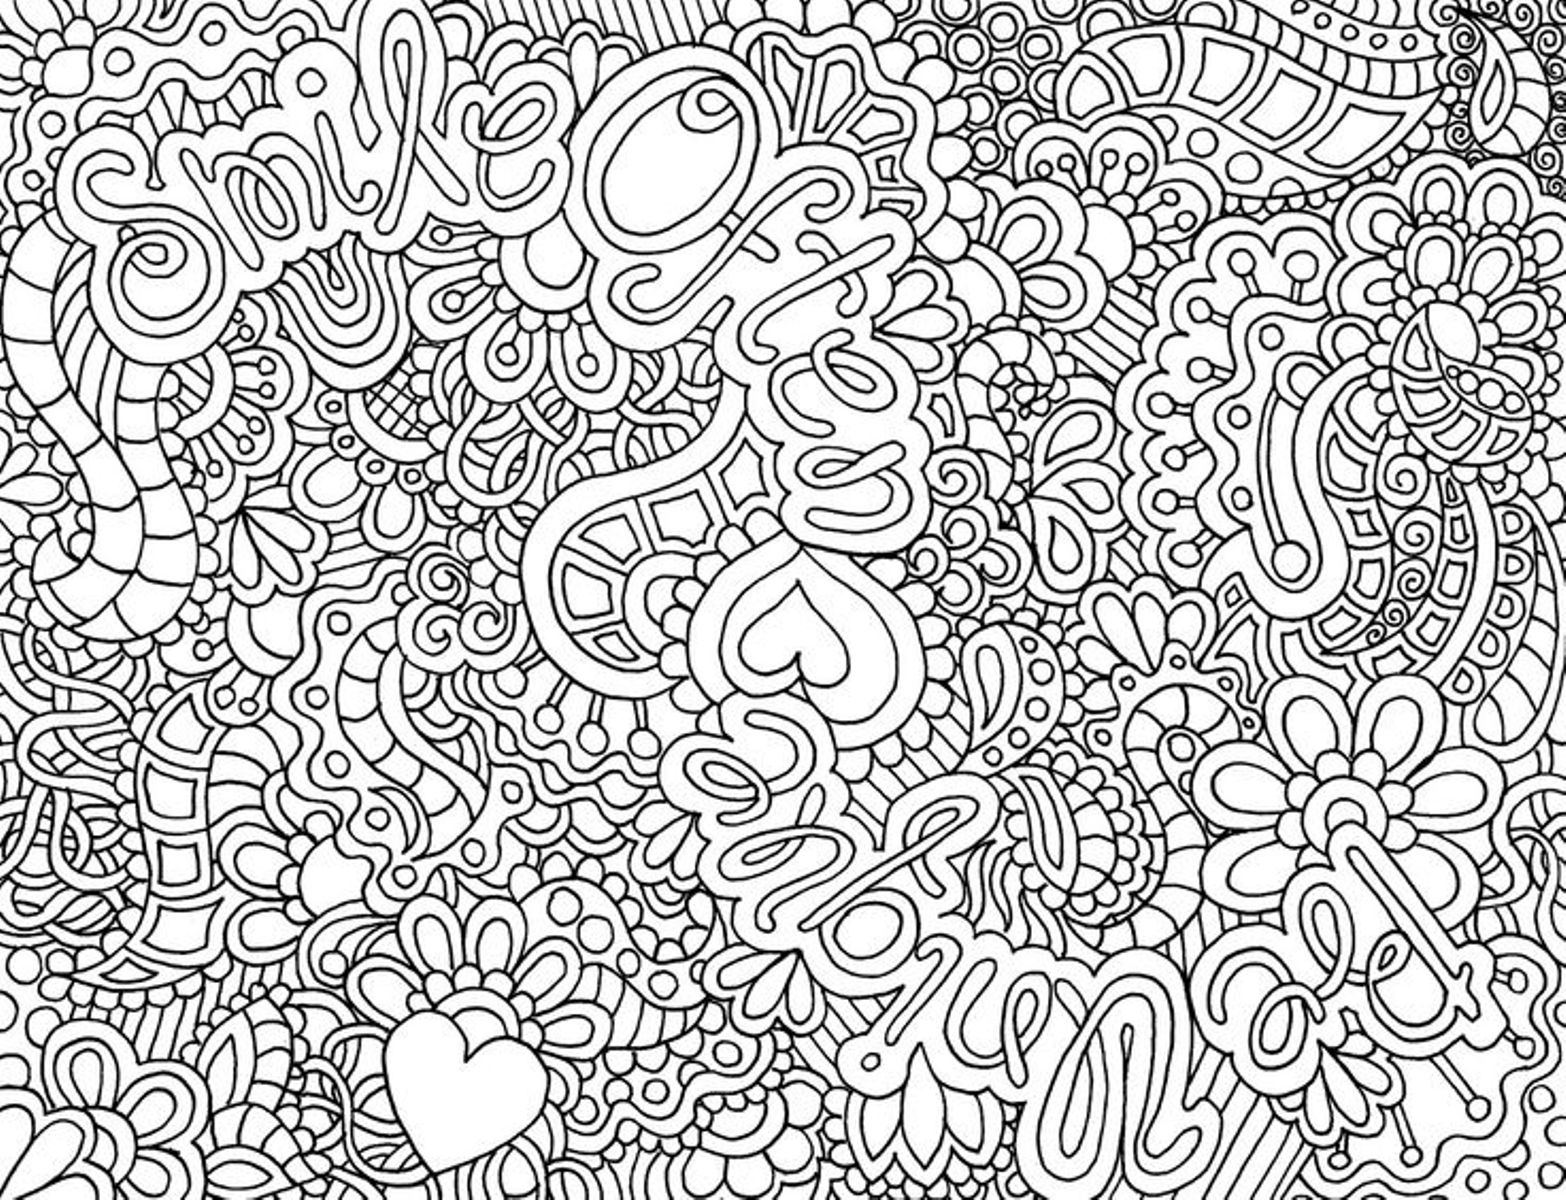 380 Unicorn Detailed Coloring Pages for Kindergarten